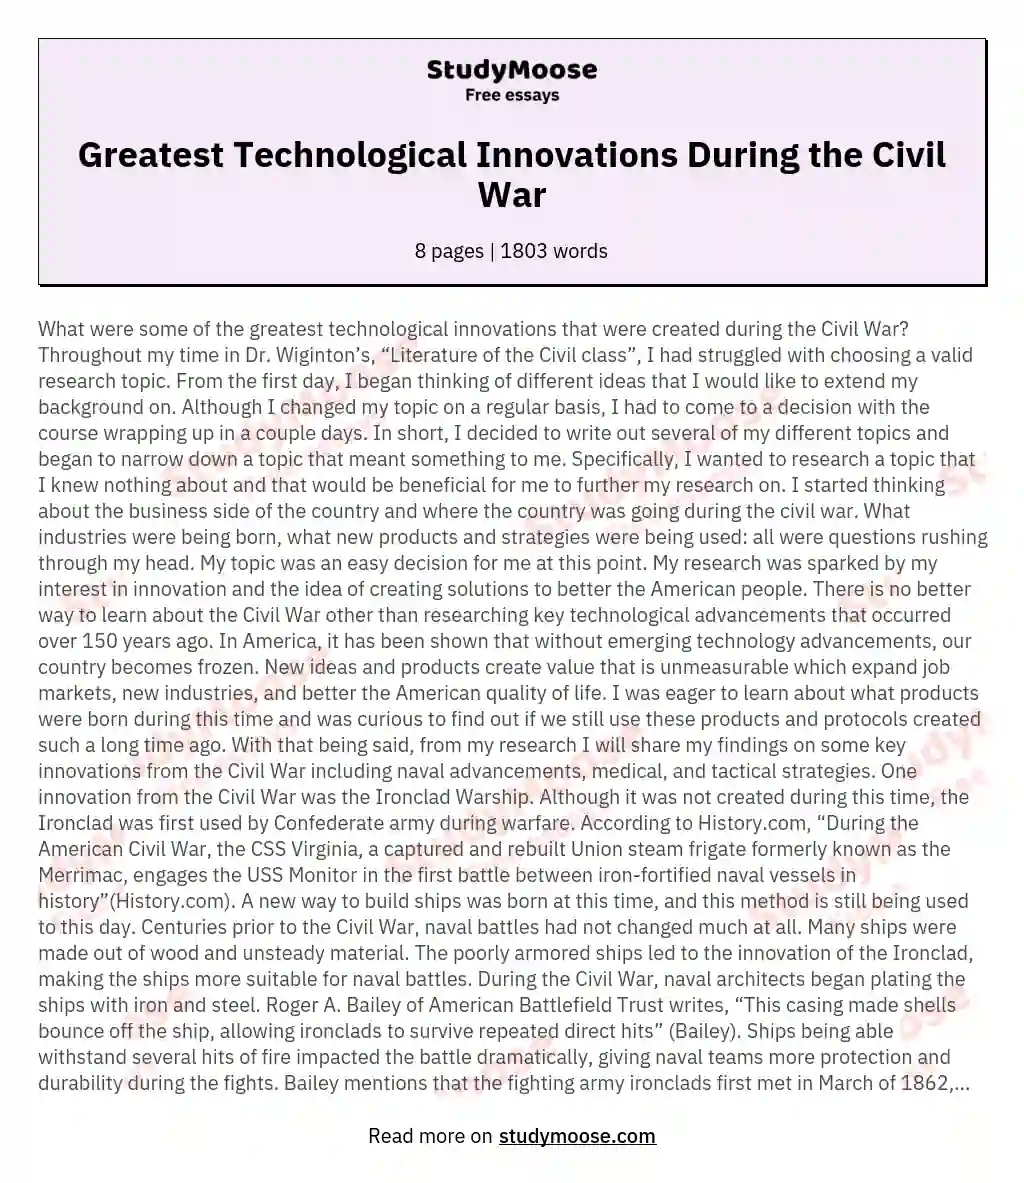 Greatest Technological Innovations During the Civil War essay